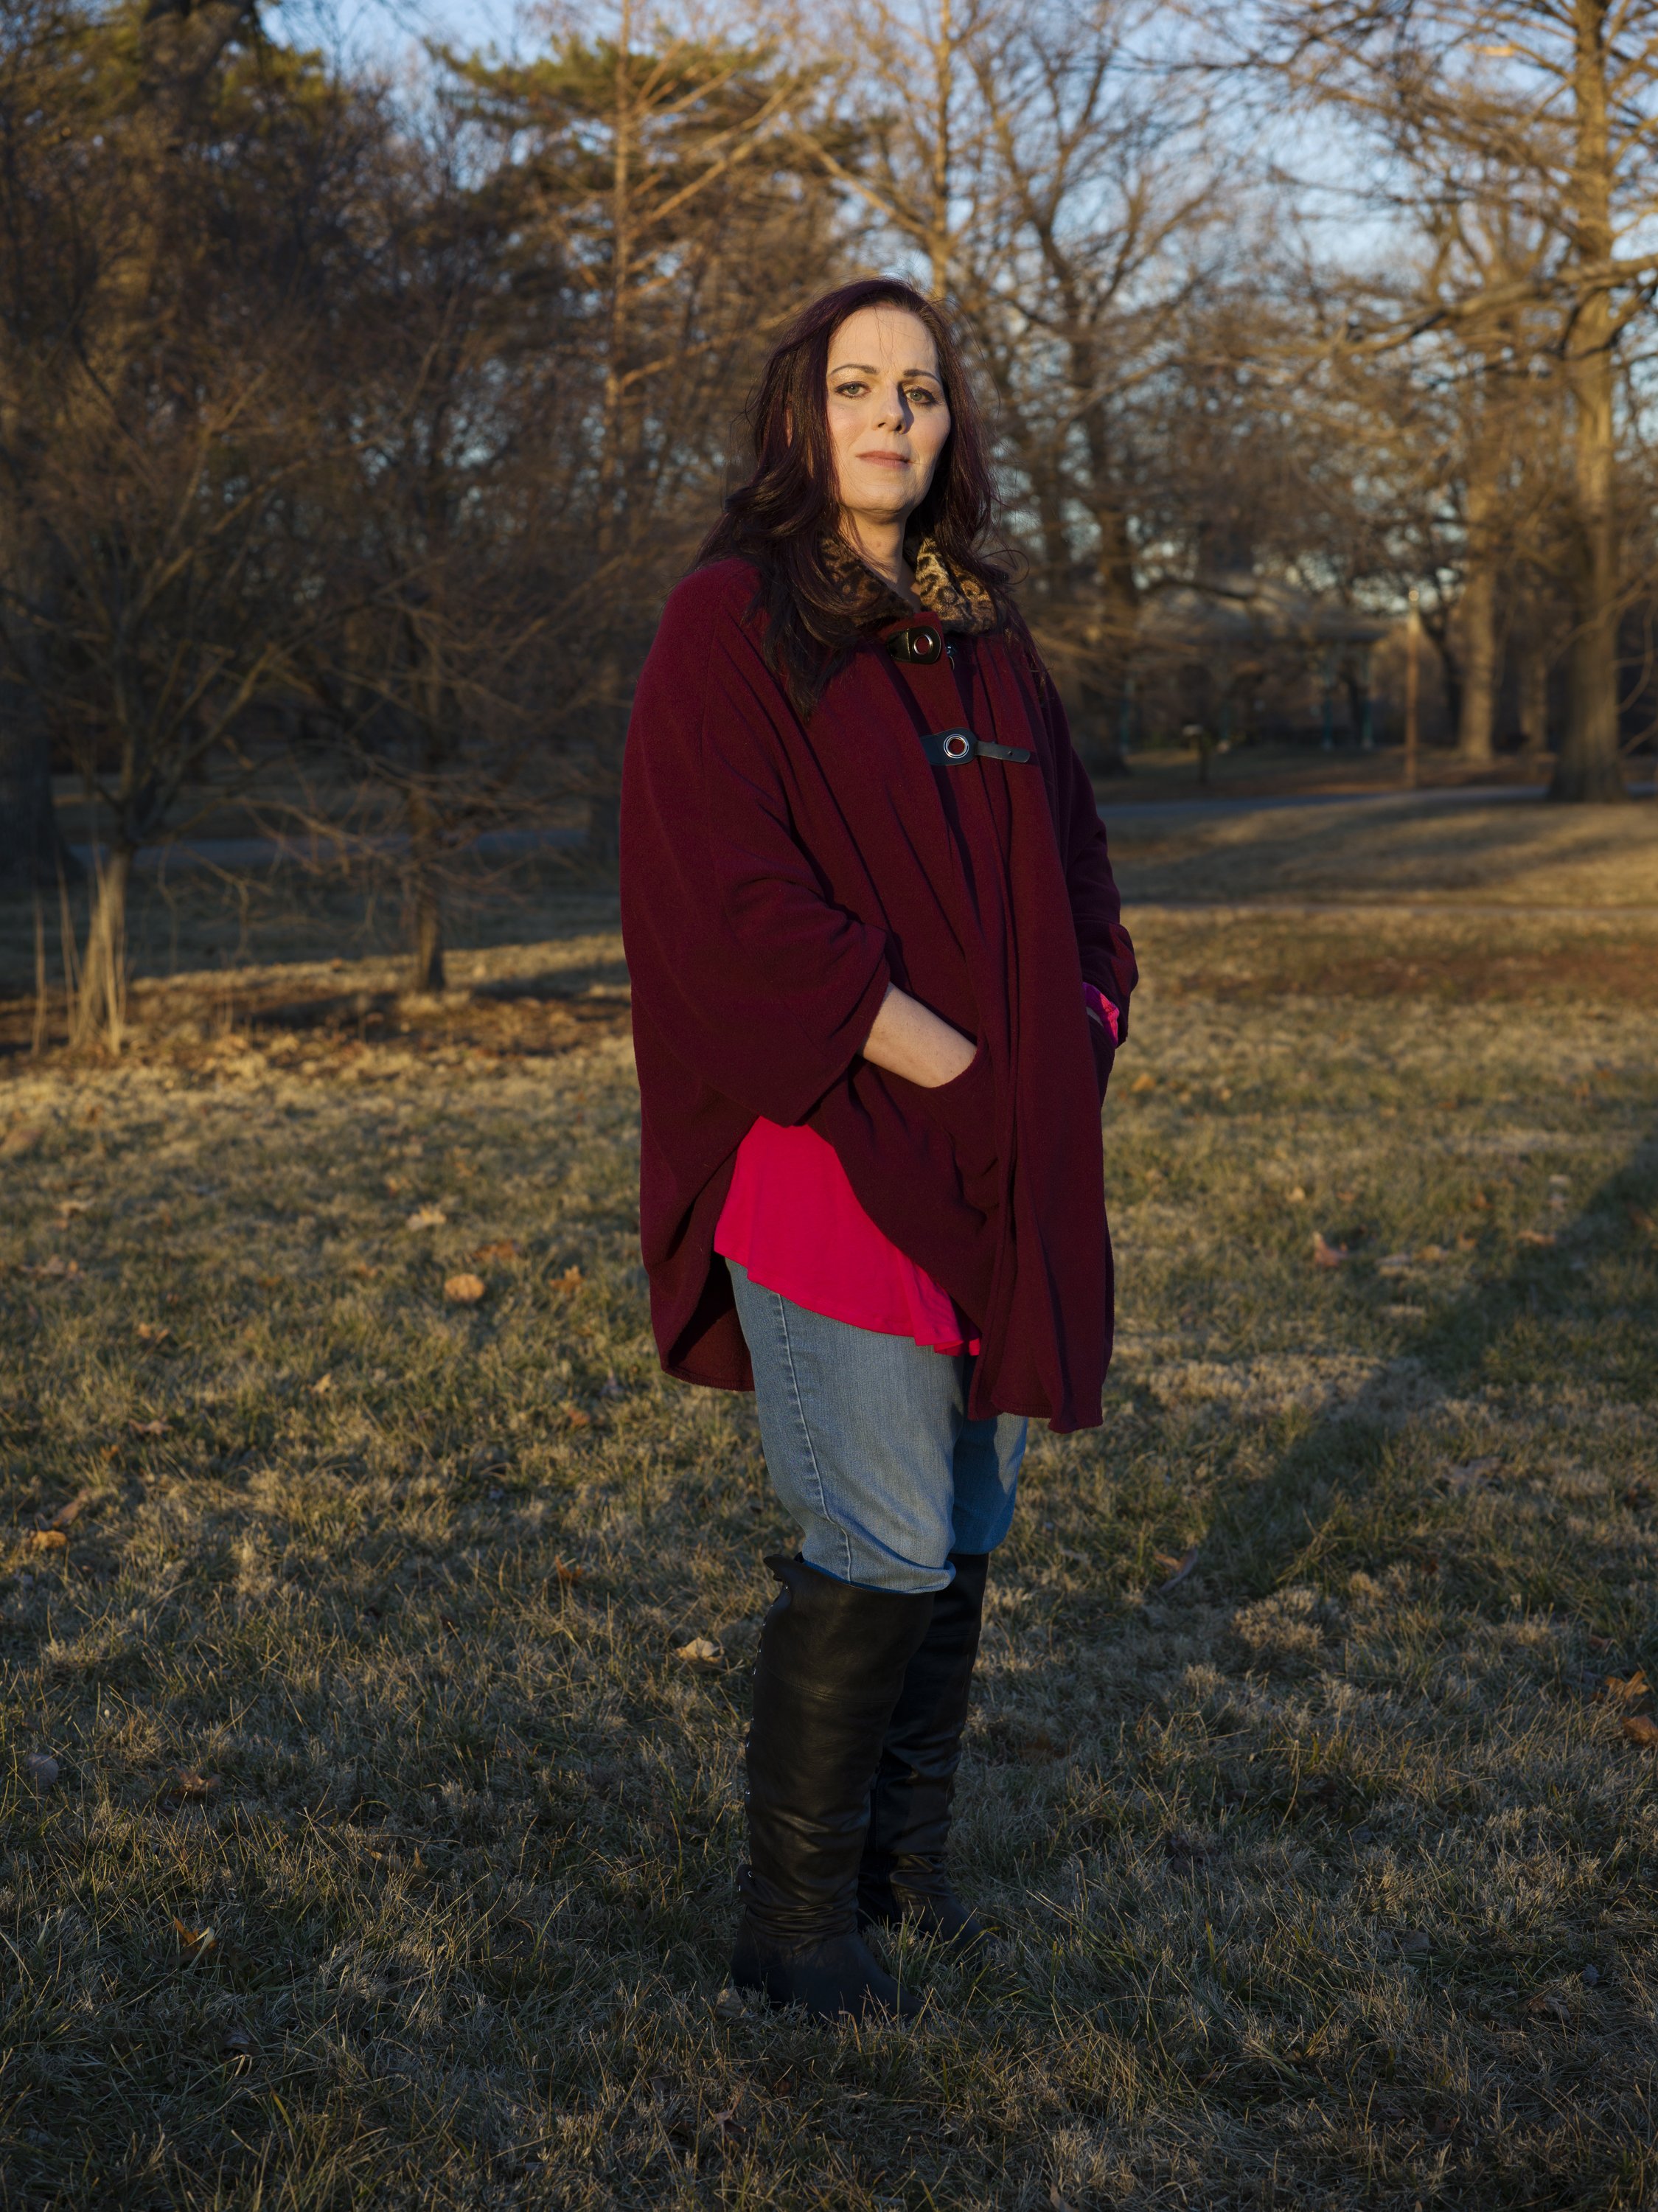  Jessica Hicklin in Tower Grove Park in St. Louis, MO, for  The Guardian , 2022.  